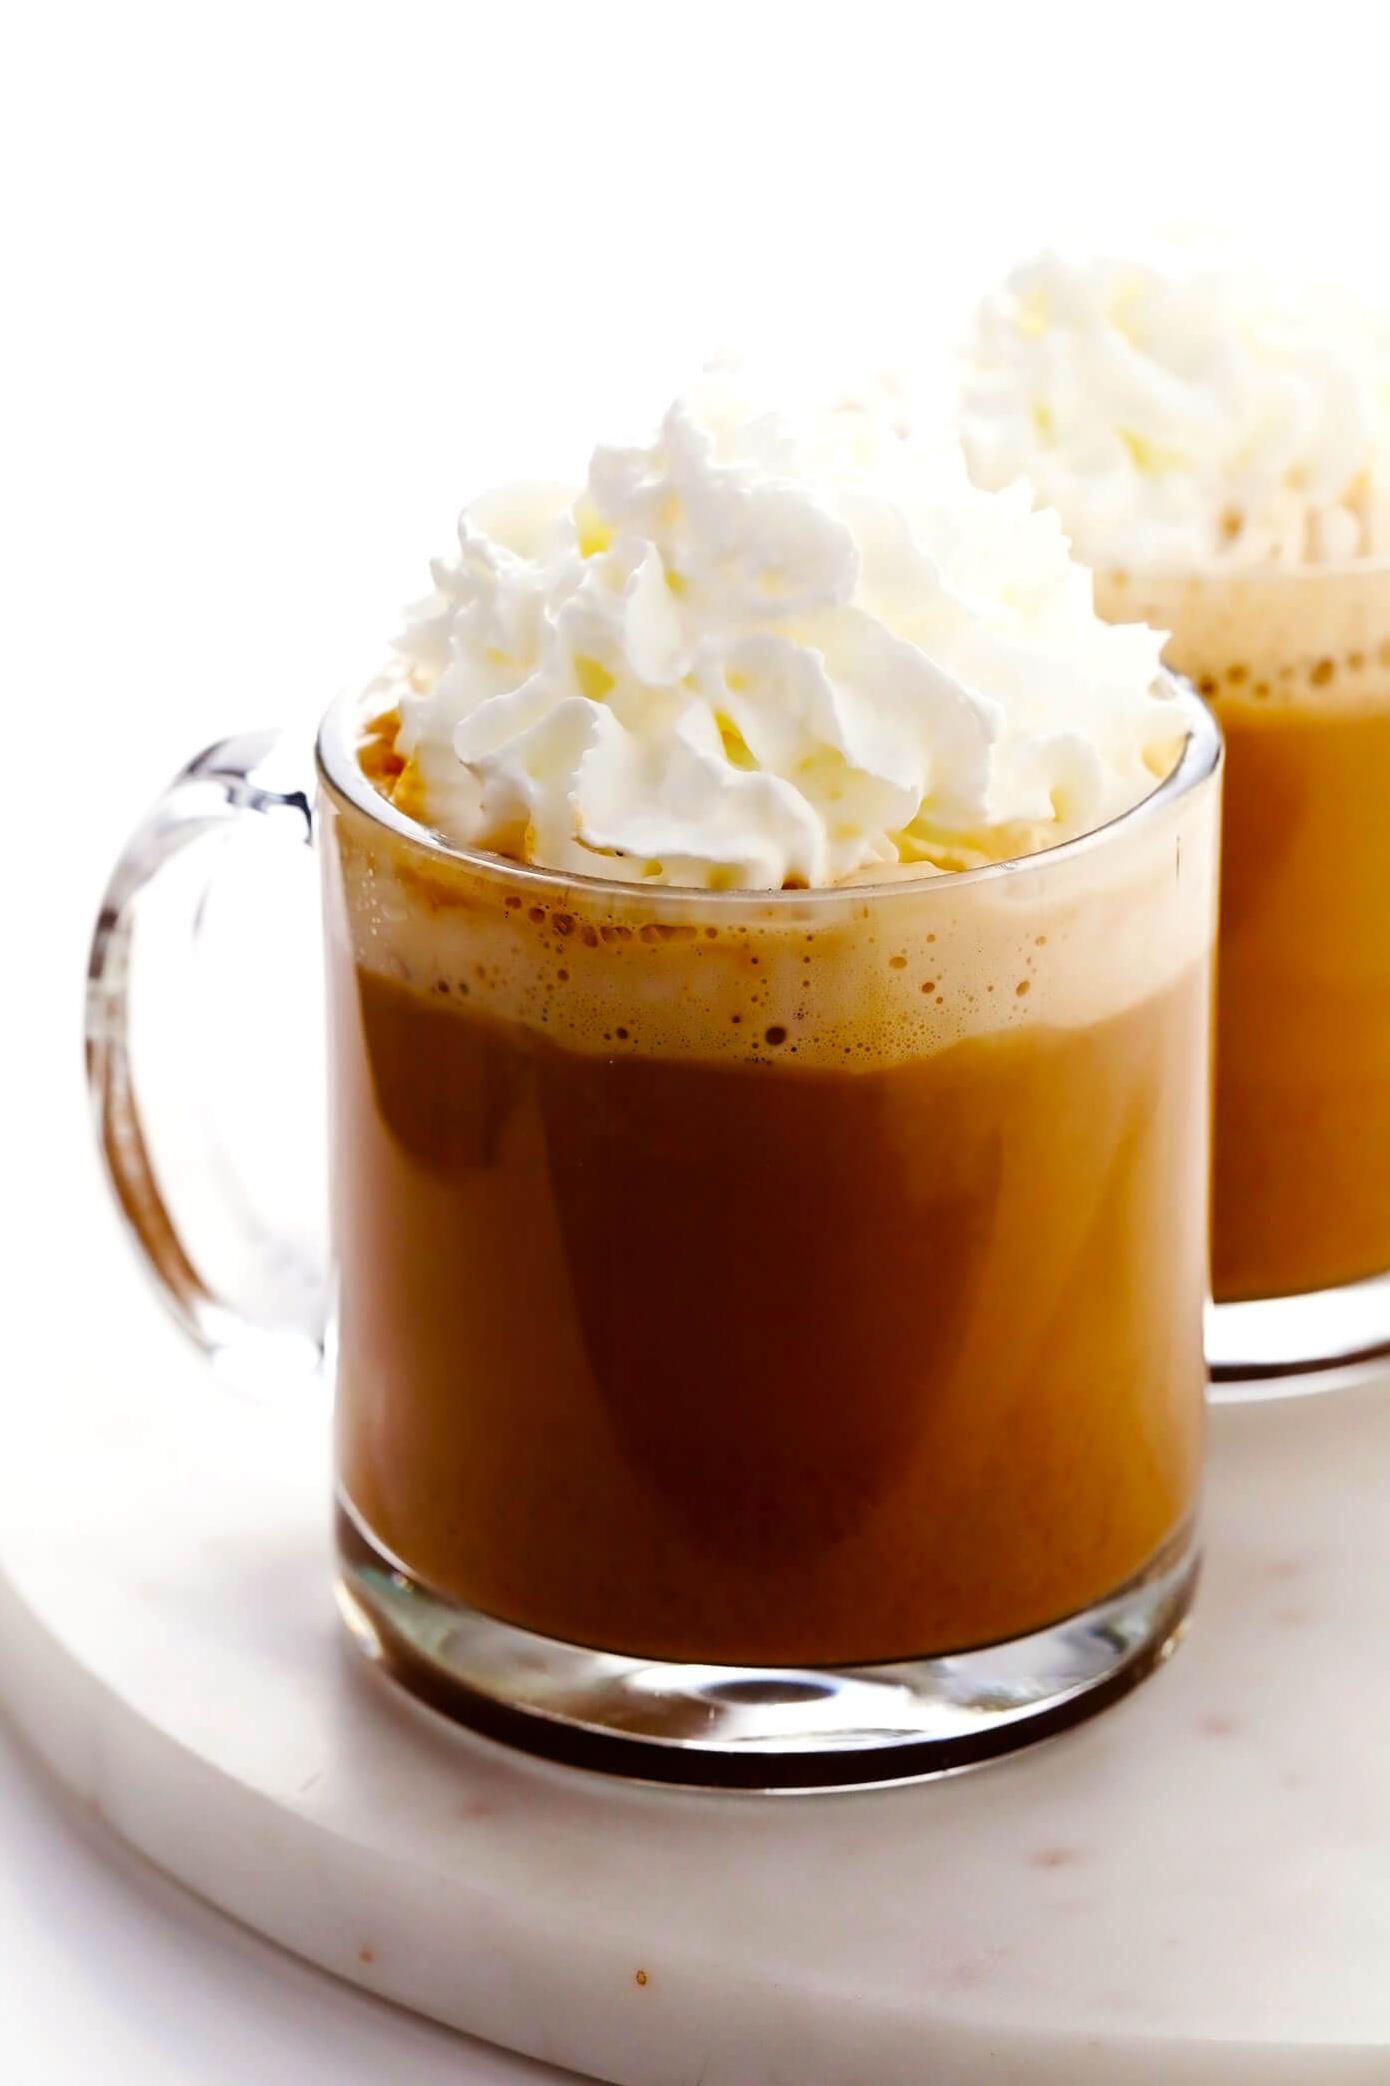  For a quick morning pick-me-up, try pumpkin coffee.